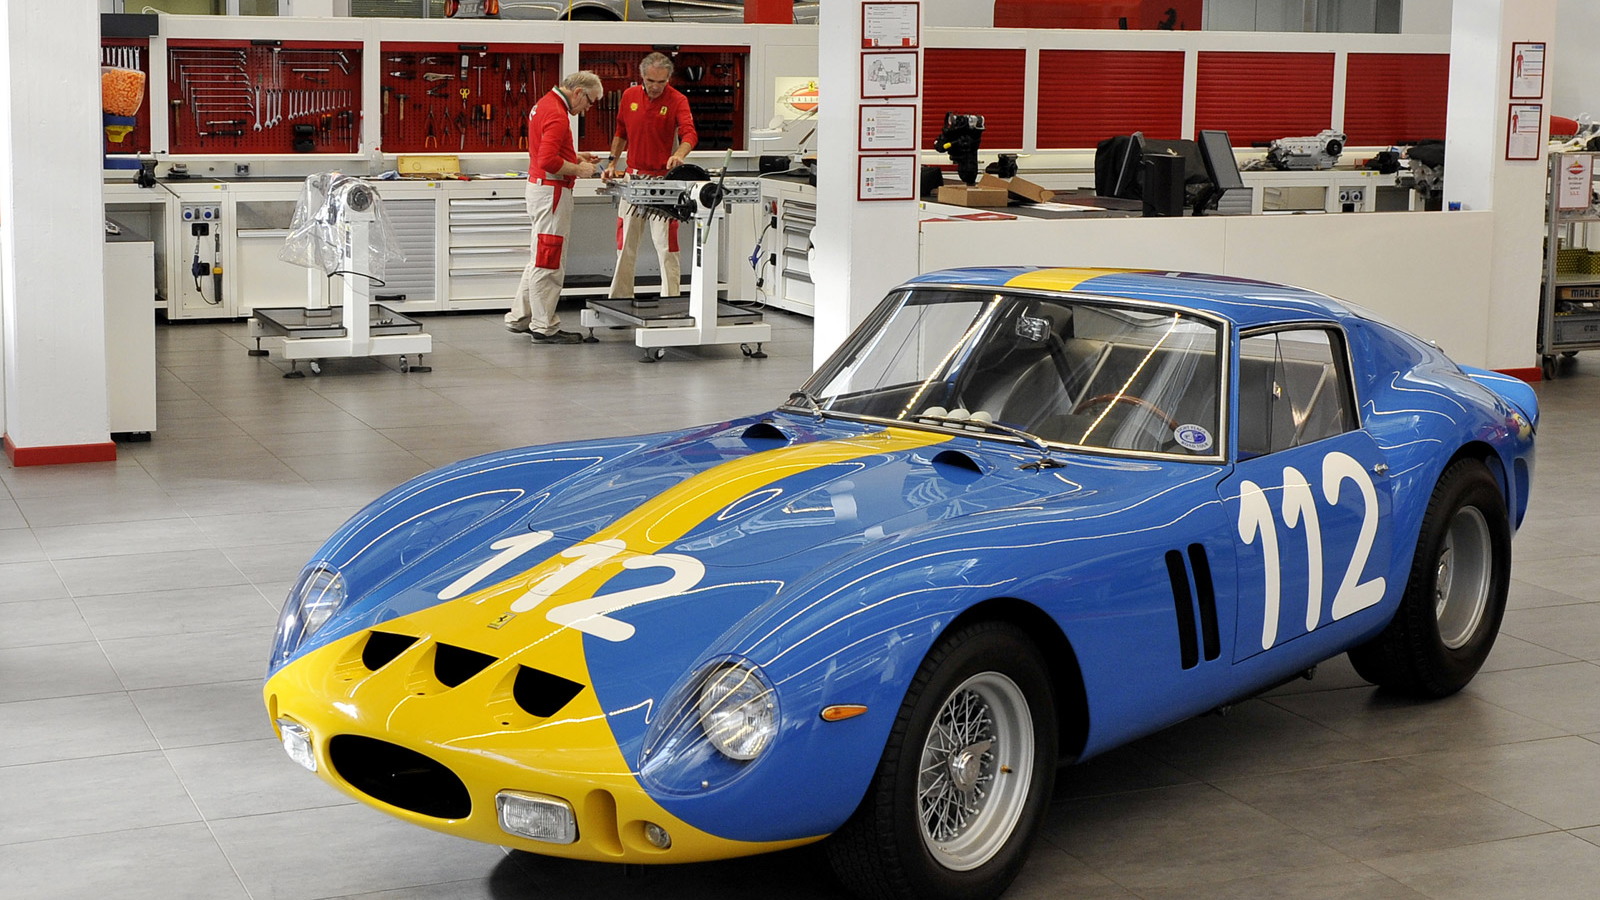 1962 Ferrari 250 GTO with chassis #3445 GT